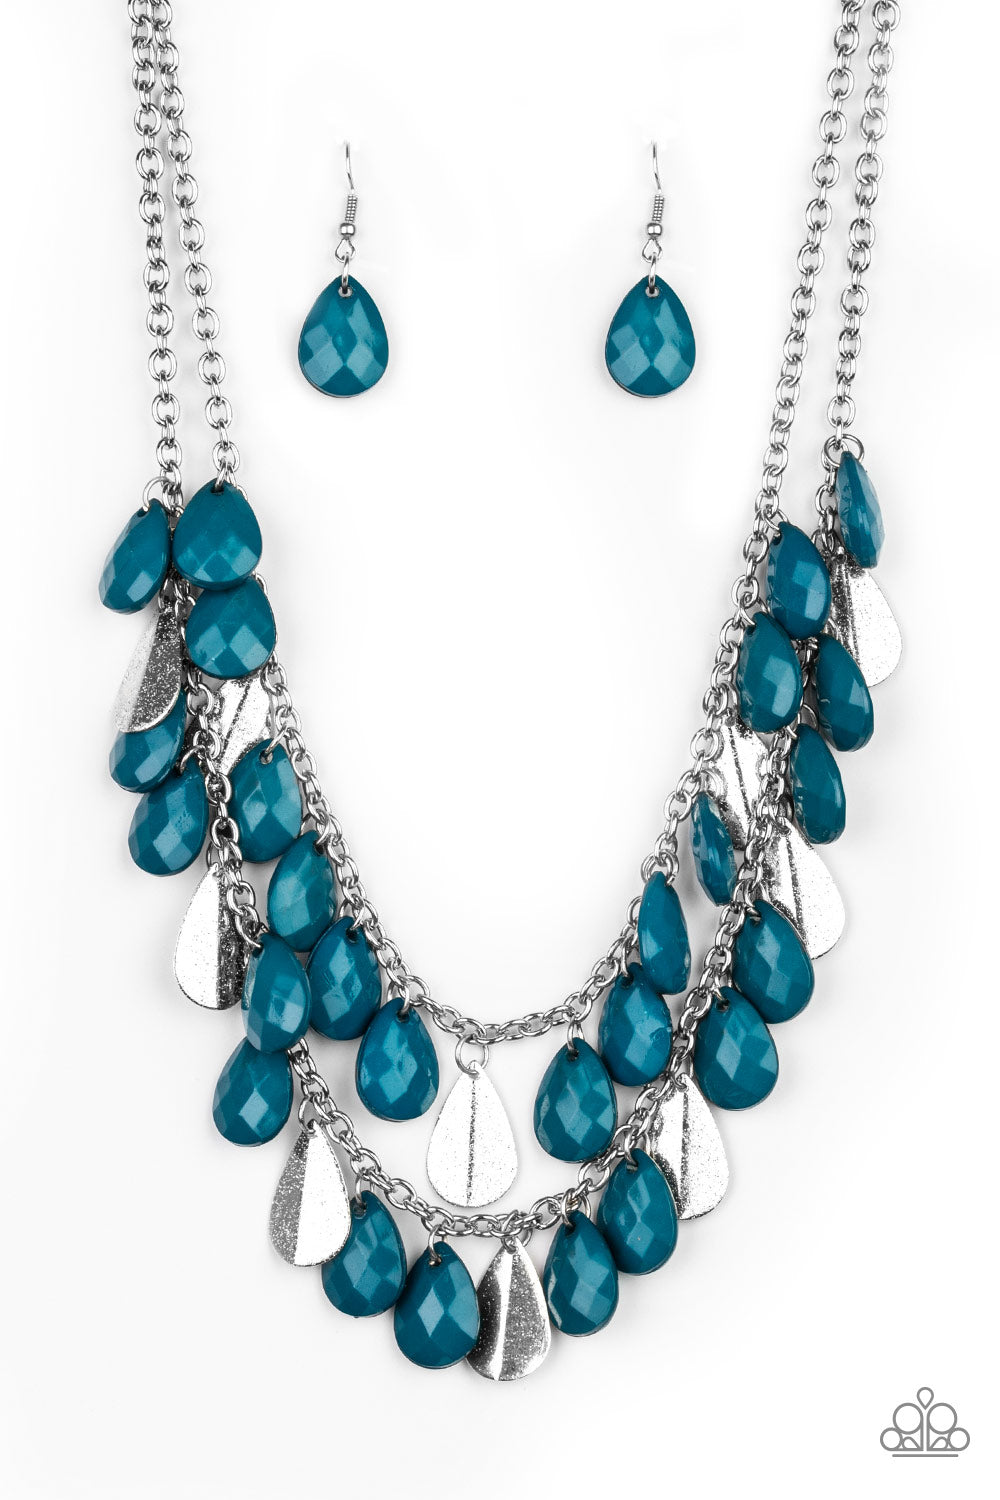 Life of the FIESTA - Blue - Necklace - Paparazzi Accessories